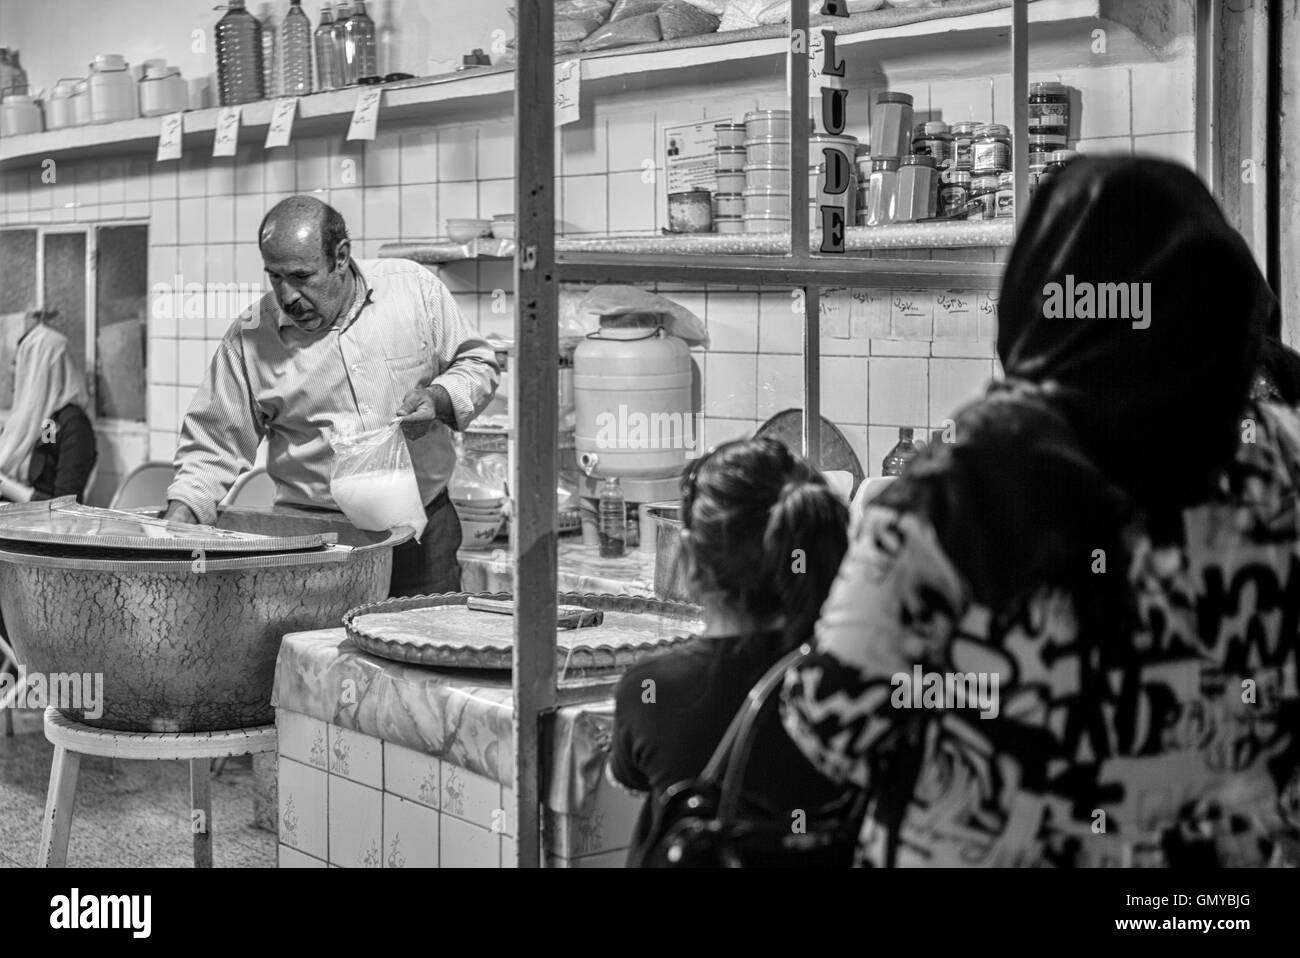 Crowd waiting outside popular faloodeh shop for the sweet noodle dessert in Yazd, Iran. Black and white night street scene. Stock Photo